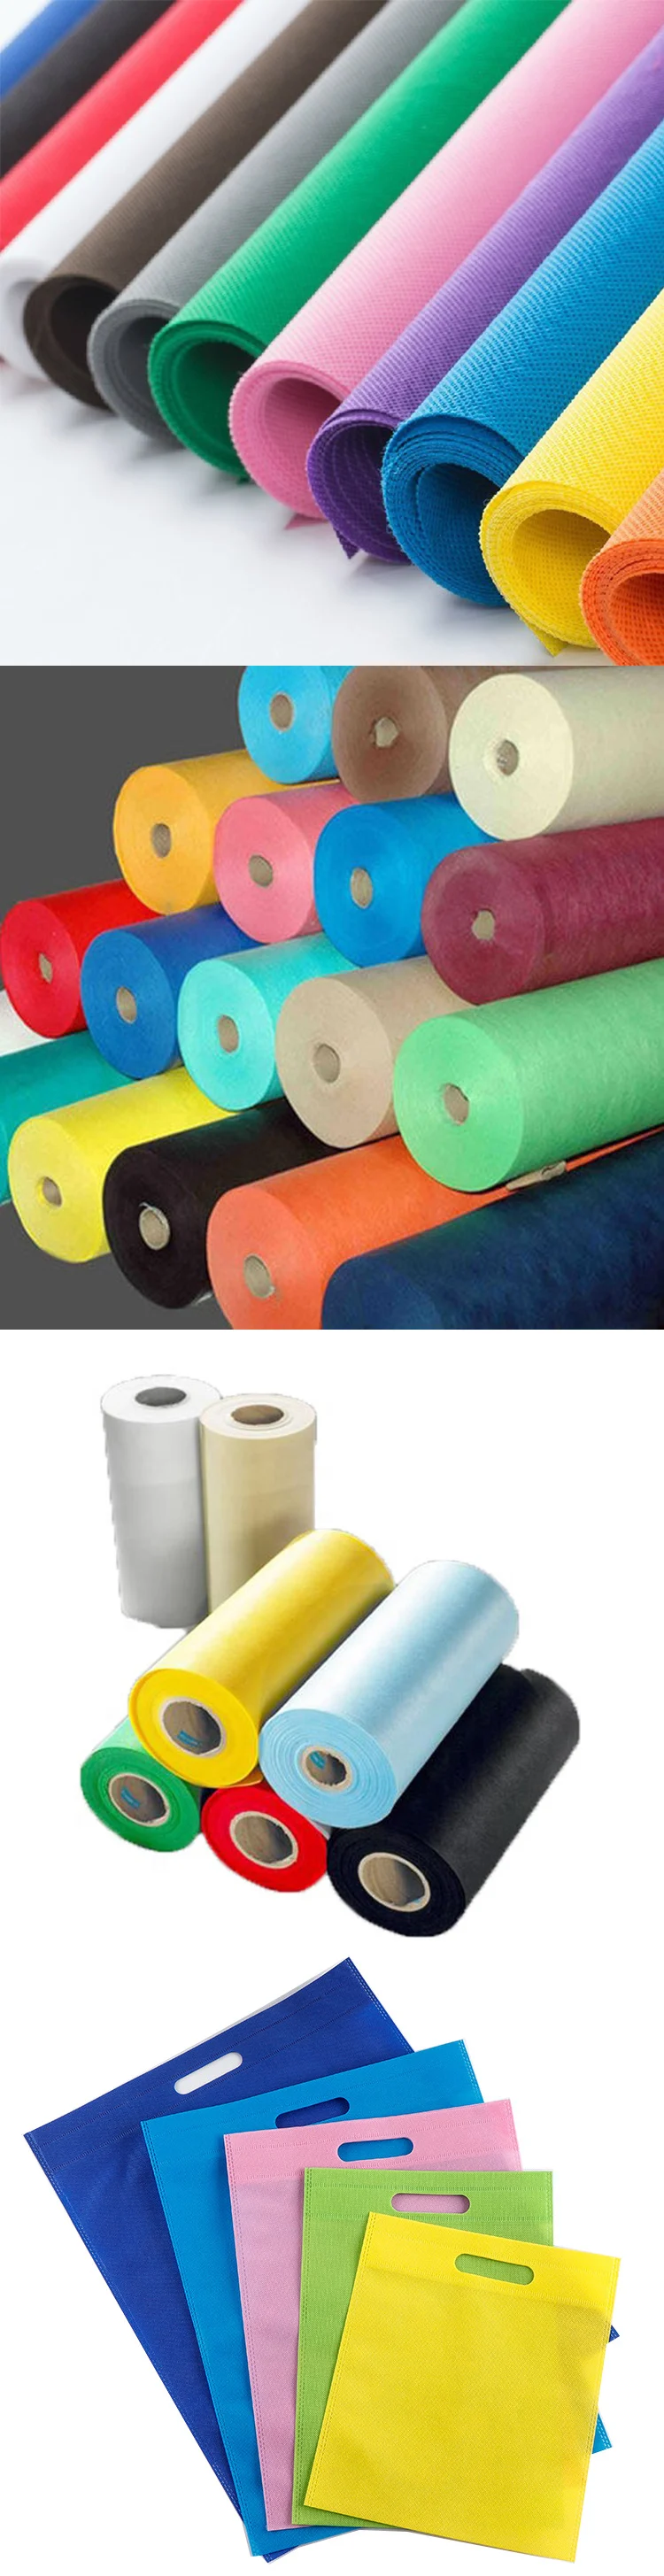 Wholesale Cheap Price Hygiene Product Materials Hydrophilic Non Woven Fabric for Garment Home Textile Hospital